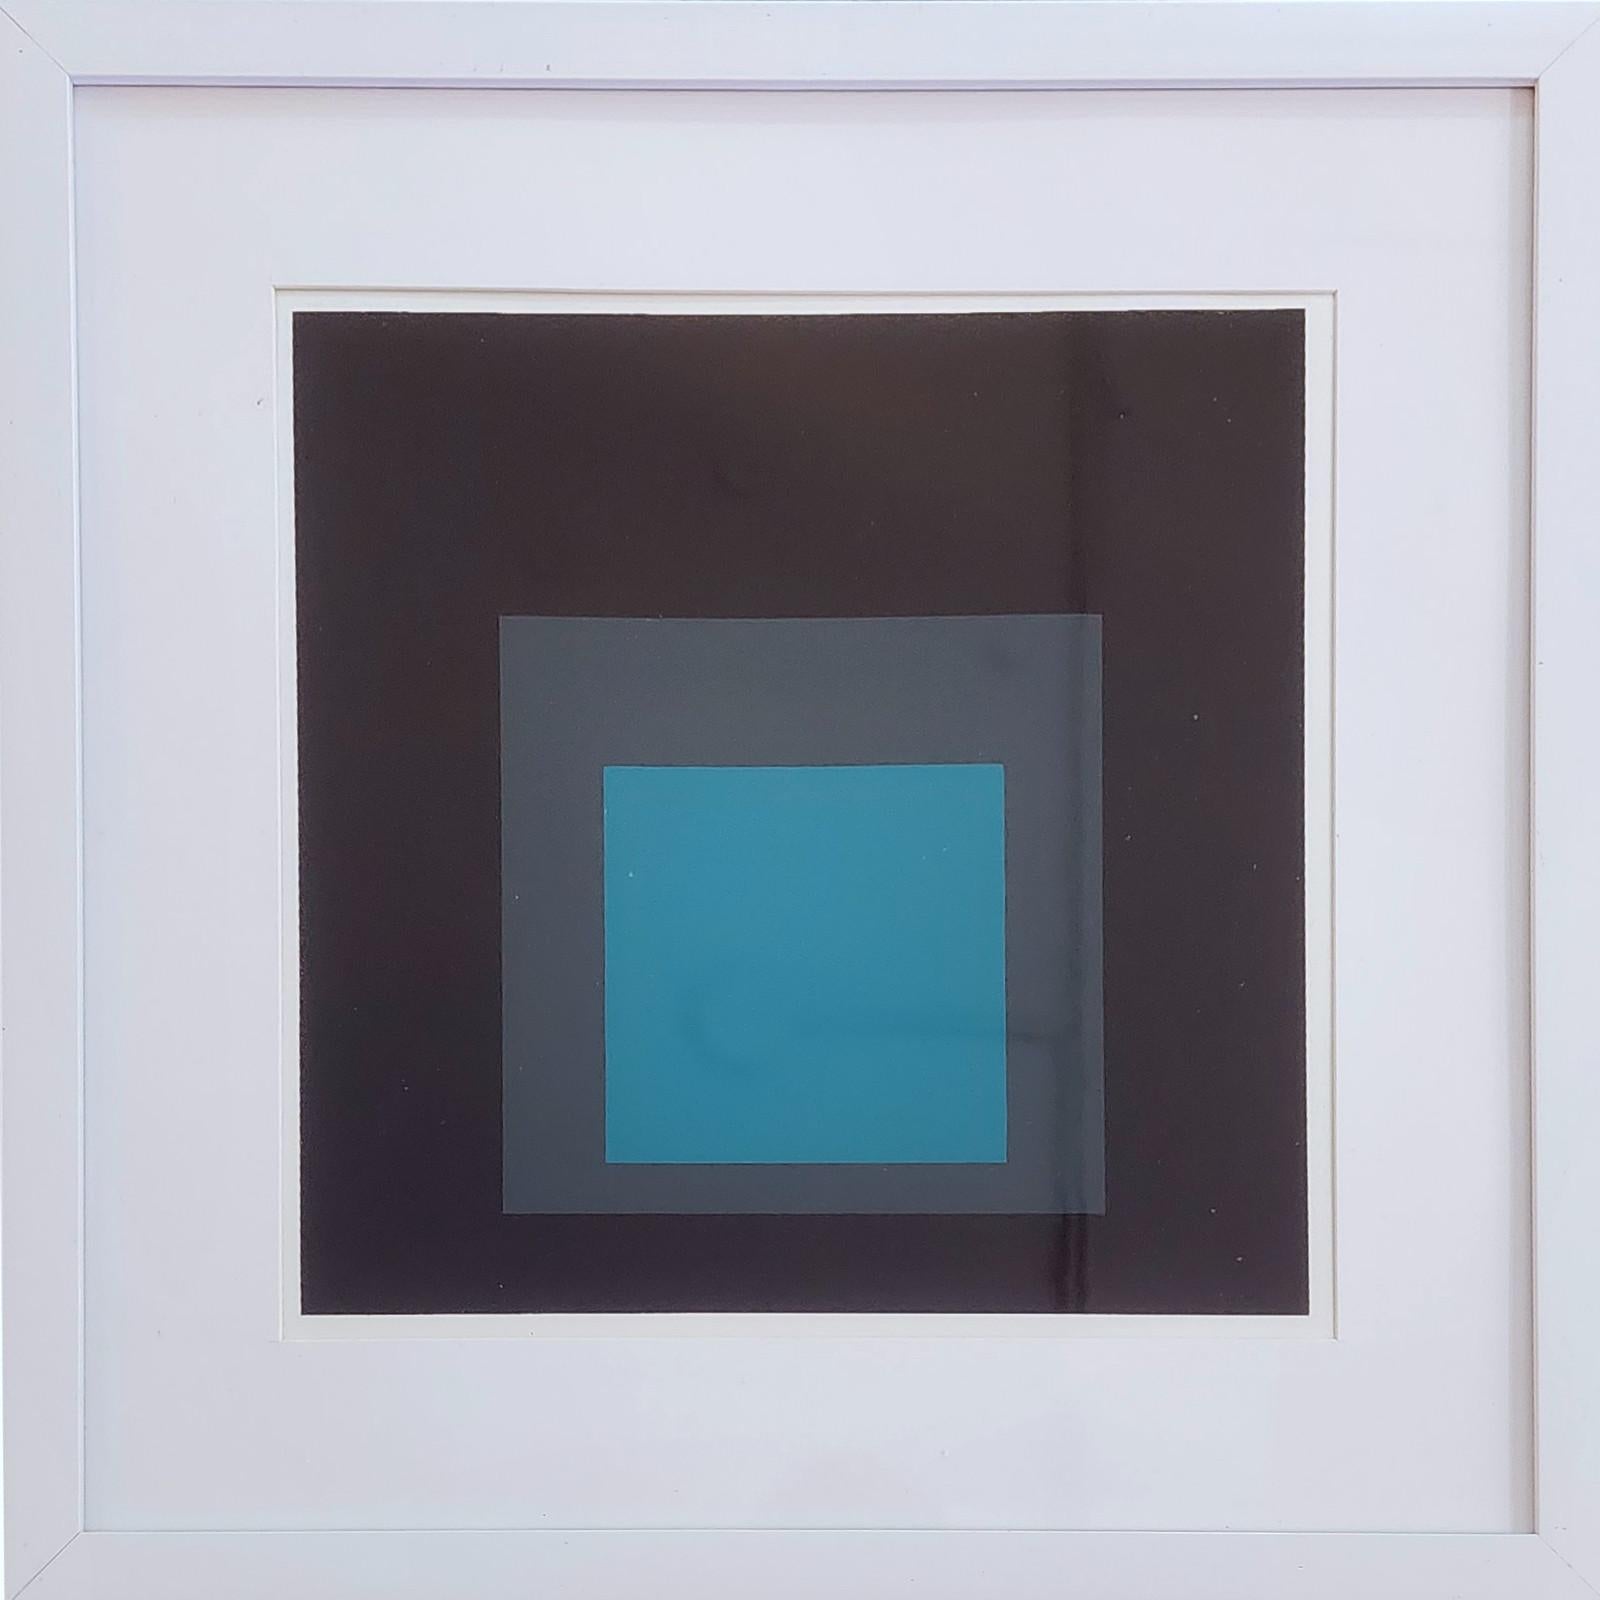 Josef Albers
Homage to the Square: Set Off (from 